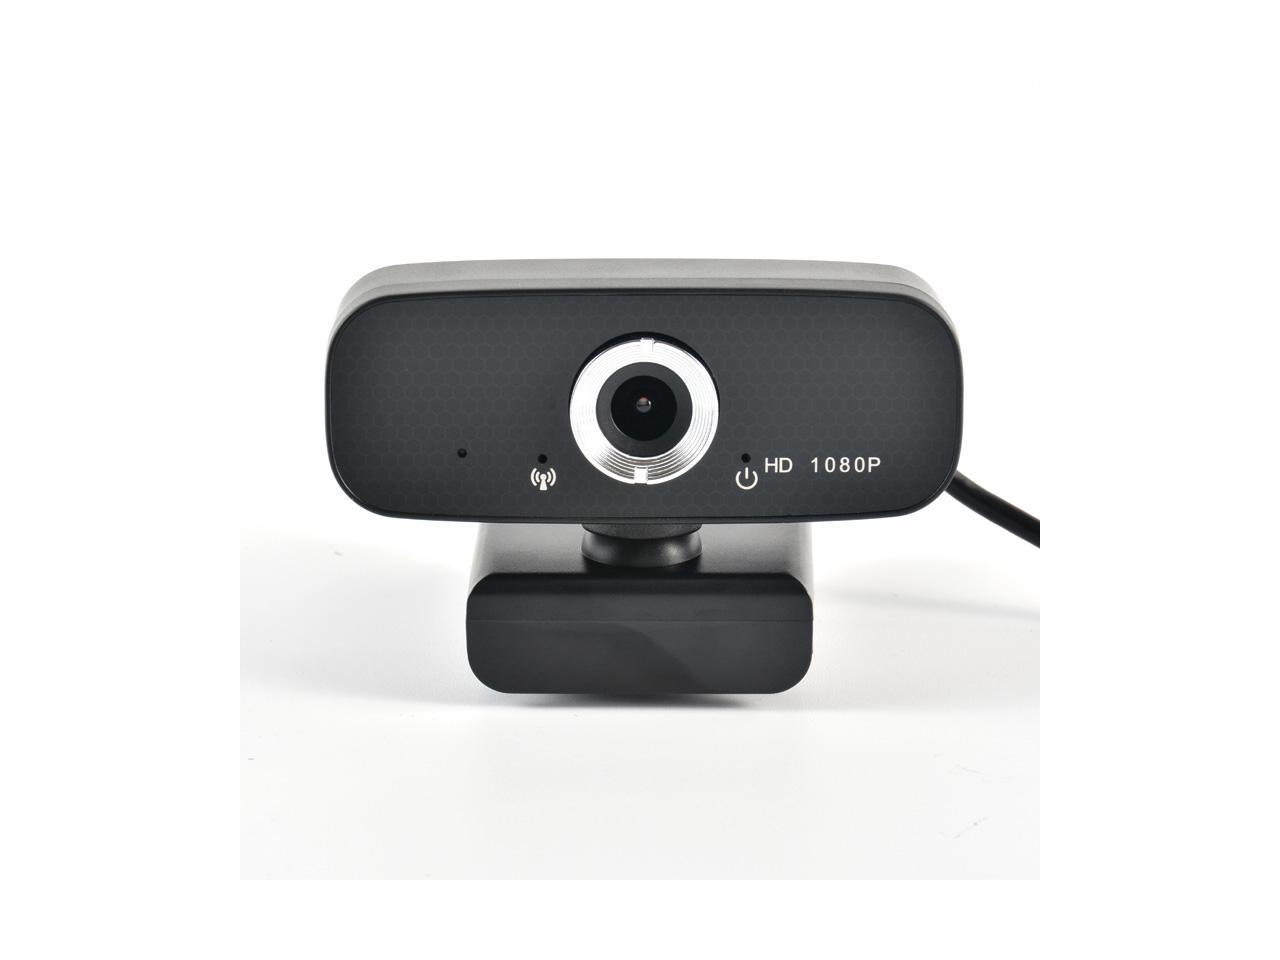 Live Streaming Bprtcra USB Computer Web Cam Camera Plug and Play Compatible with Windows Mac Os Webcam 1080p HD PC Camera Game Live Conference Android Chrome for Calling Online Classes 